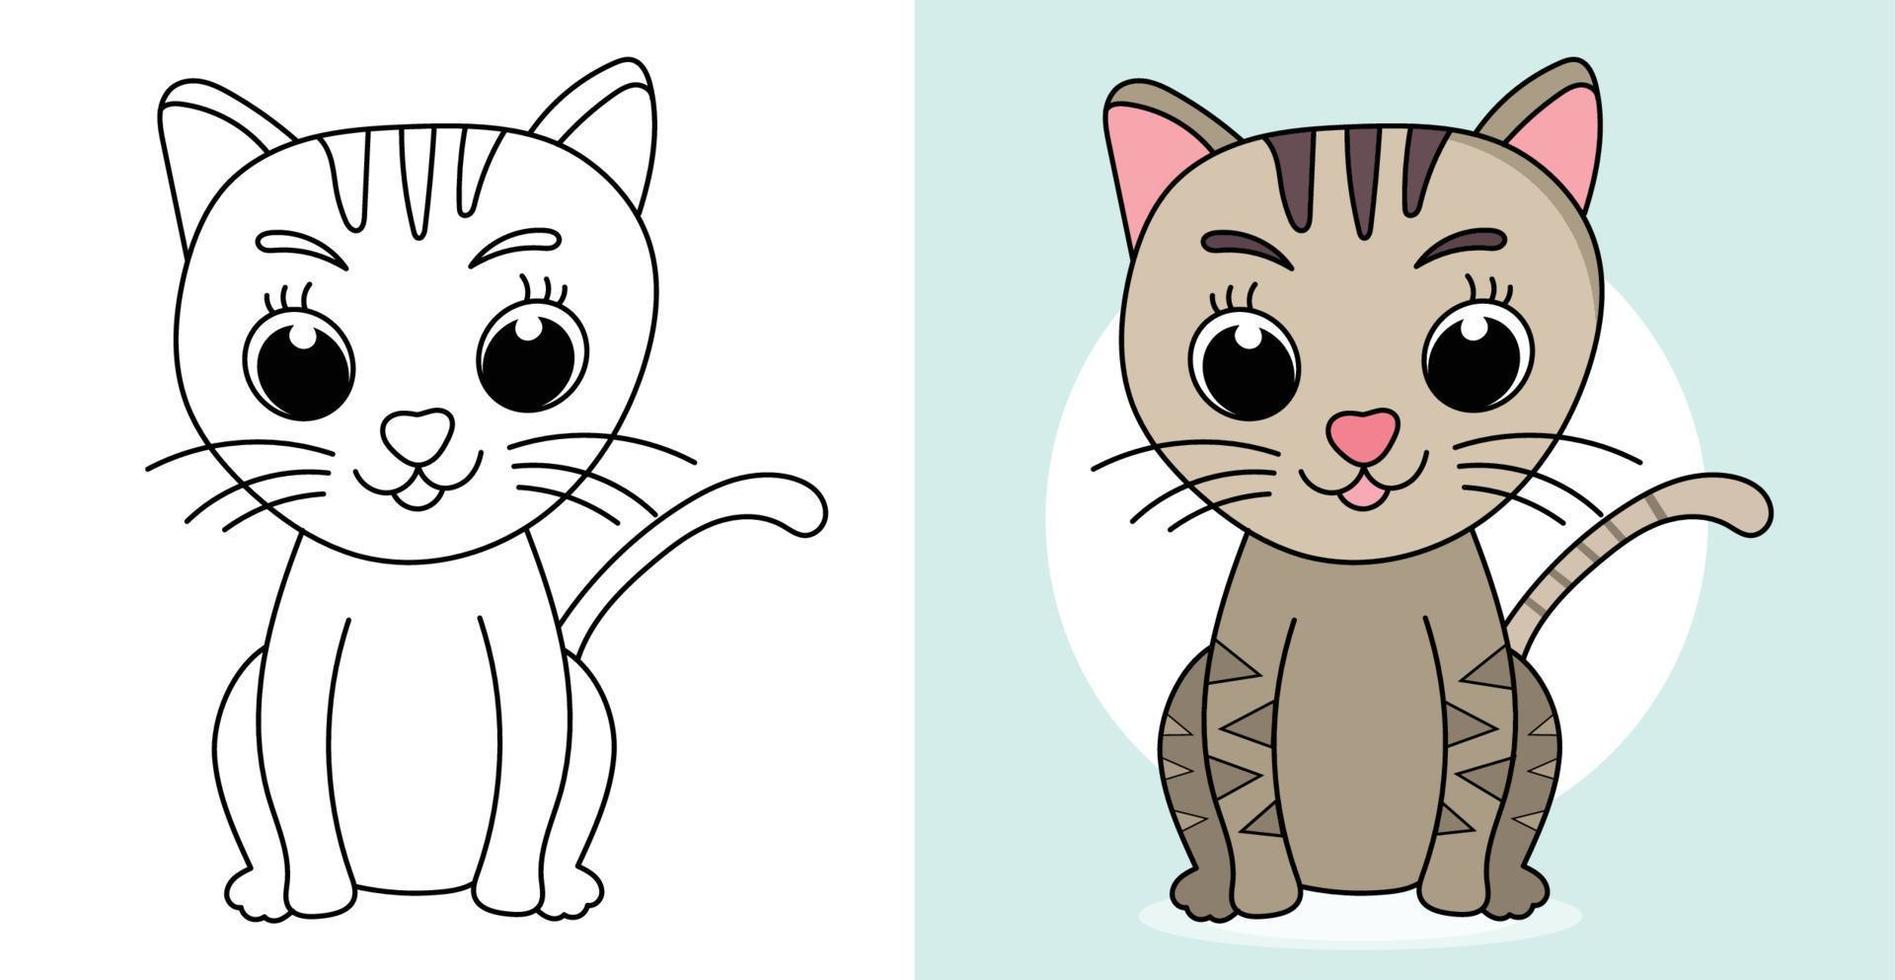 Hand-drawn outline pet cute cat illustration Kitten cartoon character vector coloring page for kids